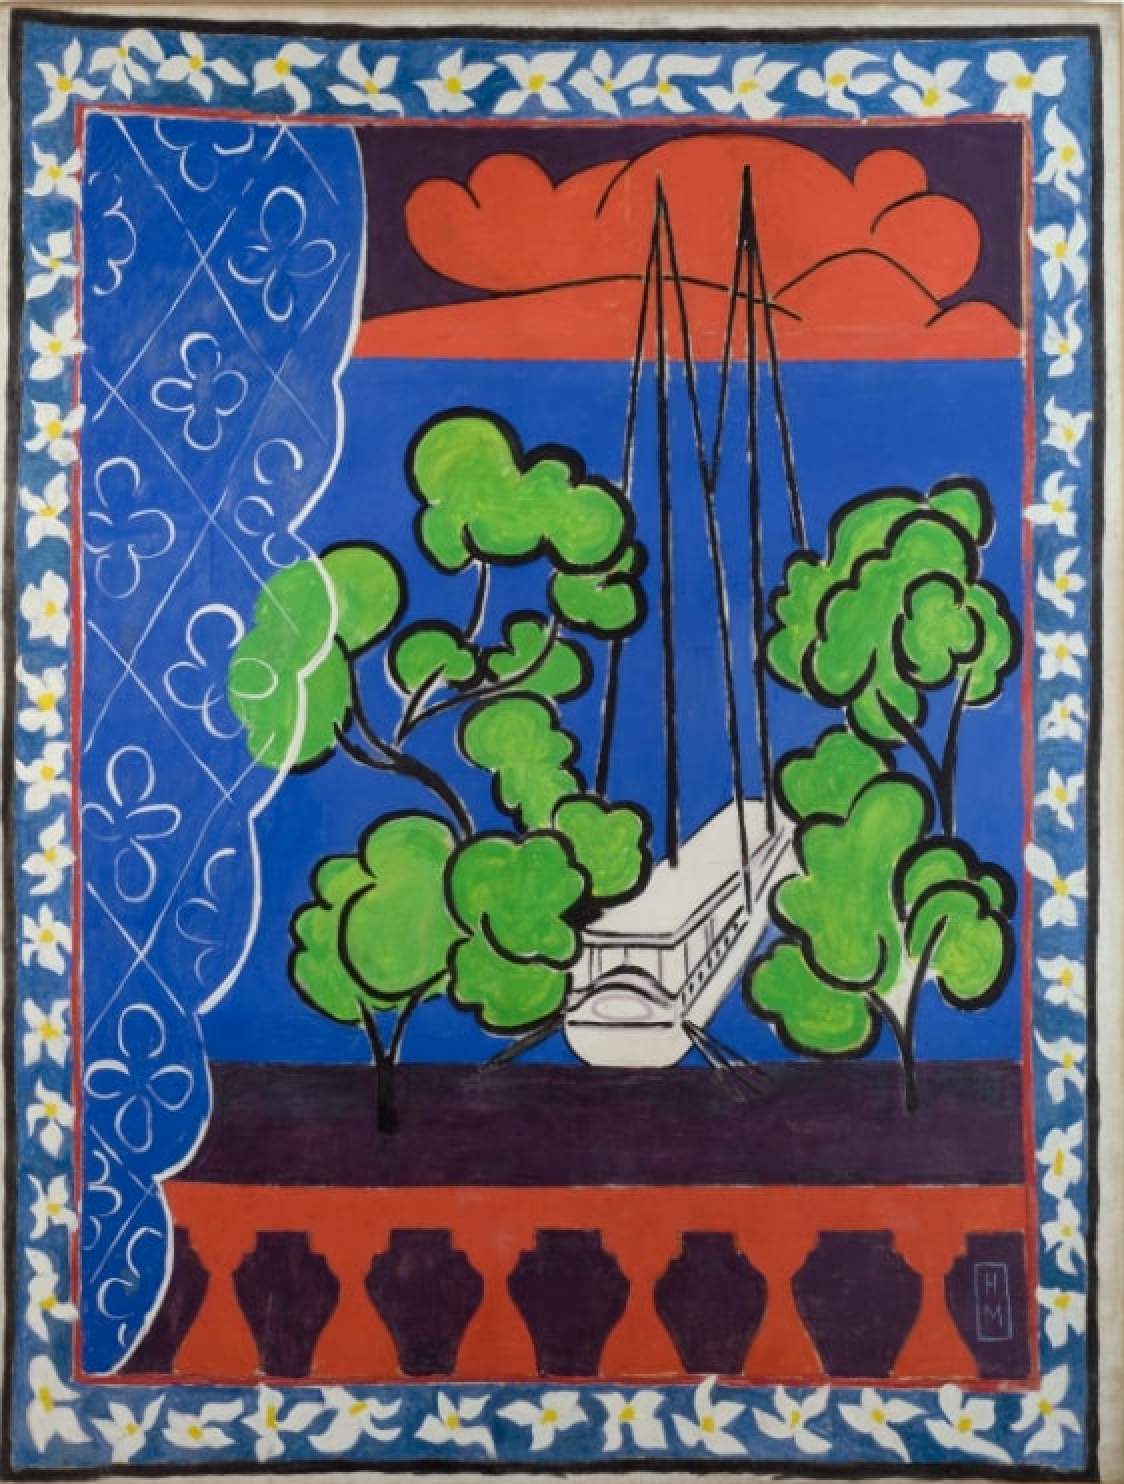 Window at Tahiti, or Tahiti II (1935-36) by Henri Matisse, among the works selected for a major exhibition in Beijing and Shanghai that was to have opened in March. Photo: Succession H Matisse 2021